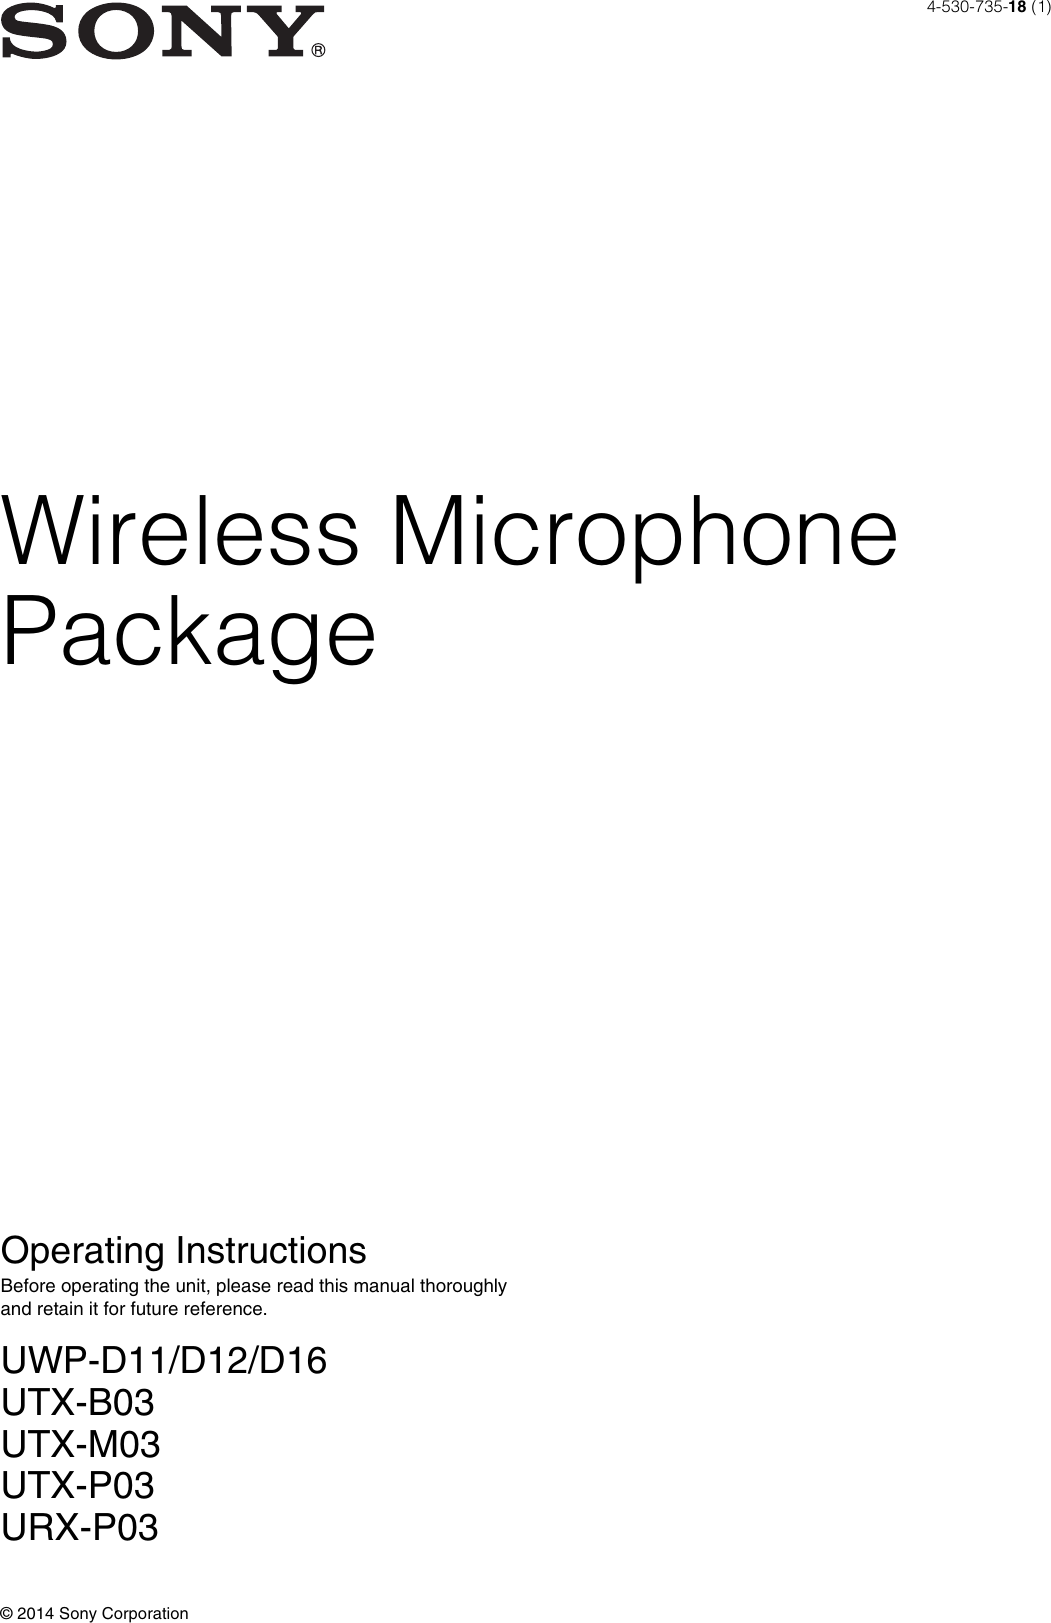 Wireless MicrophonePackageOperating InstructionsBefore operating the unit, please read this manual thoroughly and retain it for future reference.UWP-D11/D12/D16UTX-B03UTX-M03UTX-P03URX-P034-530-735-18 (1)© 2014 Sony Corporation